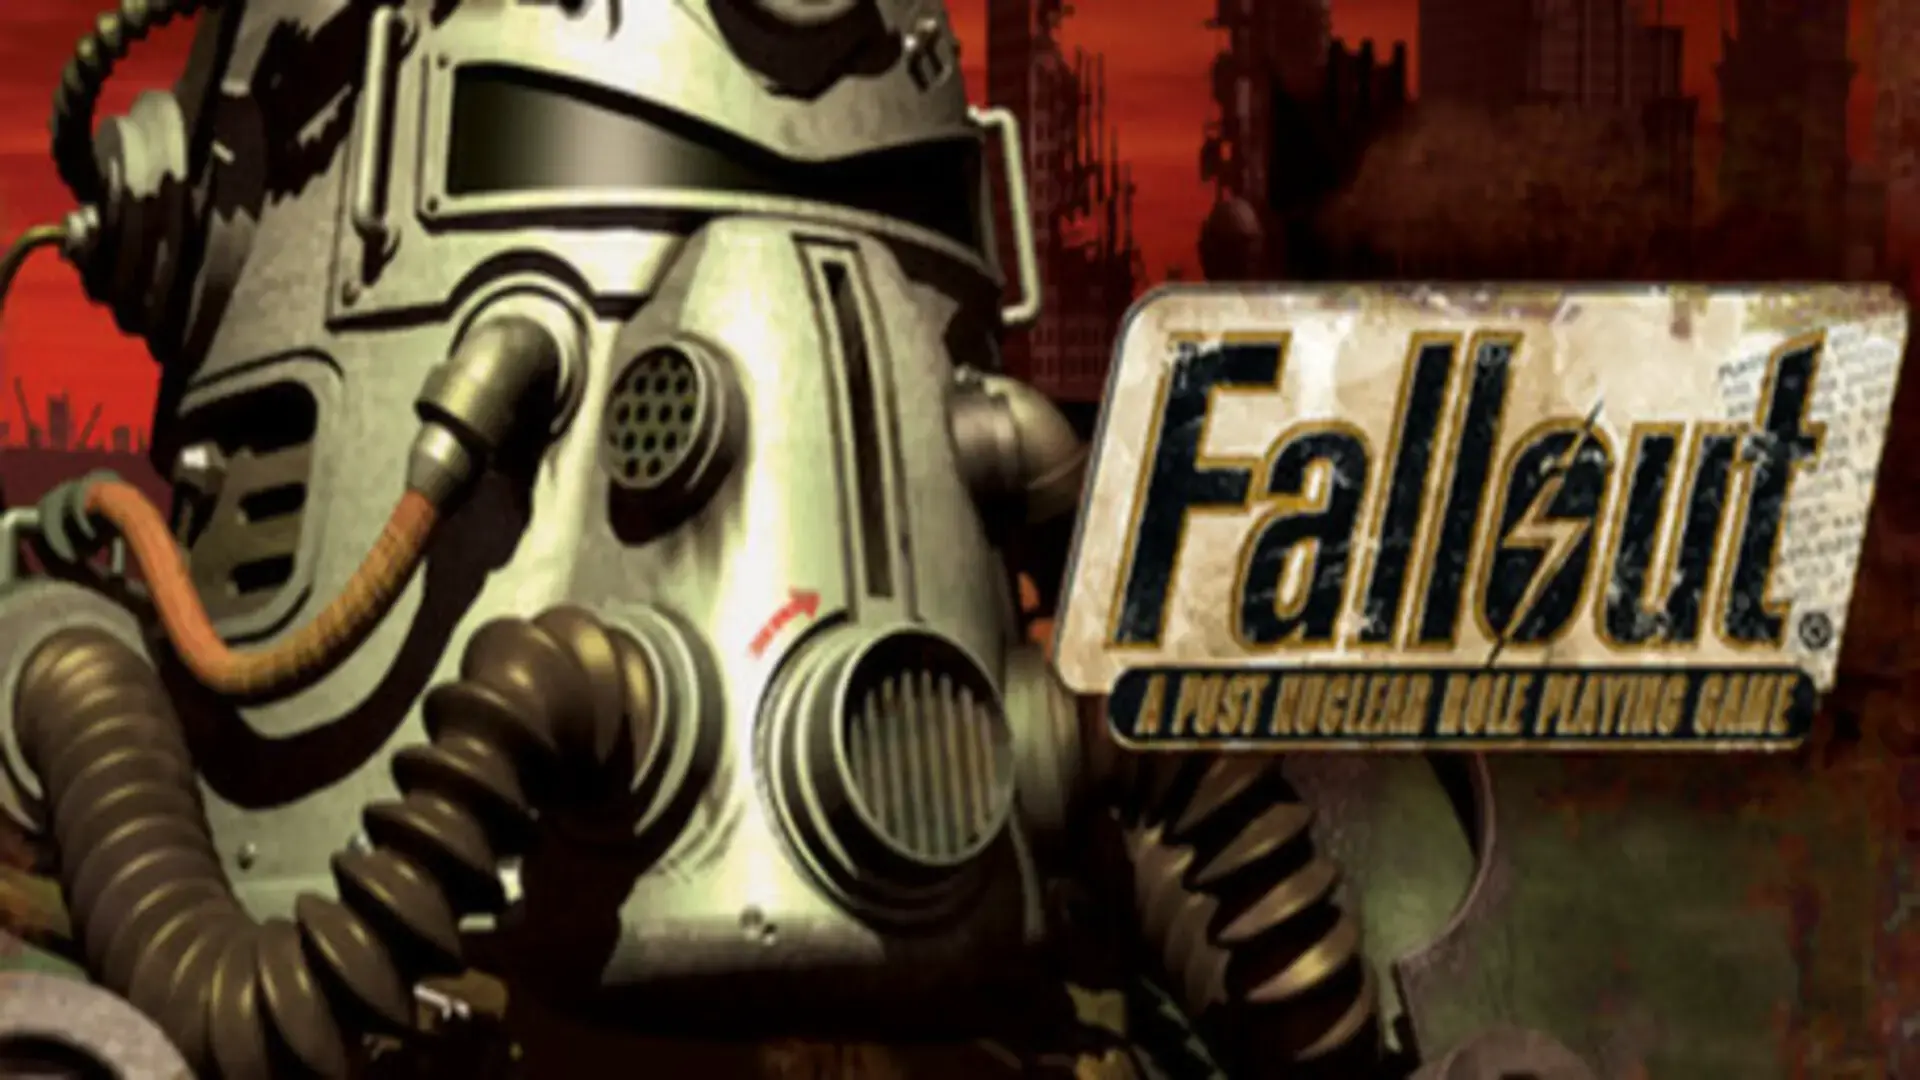 Fallout: A Post Nuclear Role Playing Game – Free Download (Build 300289)